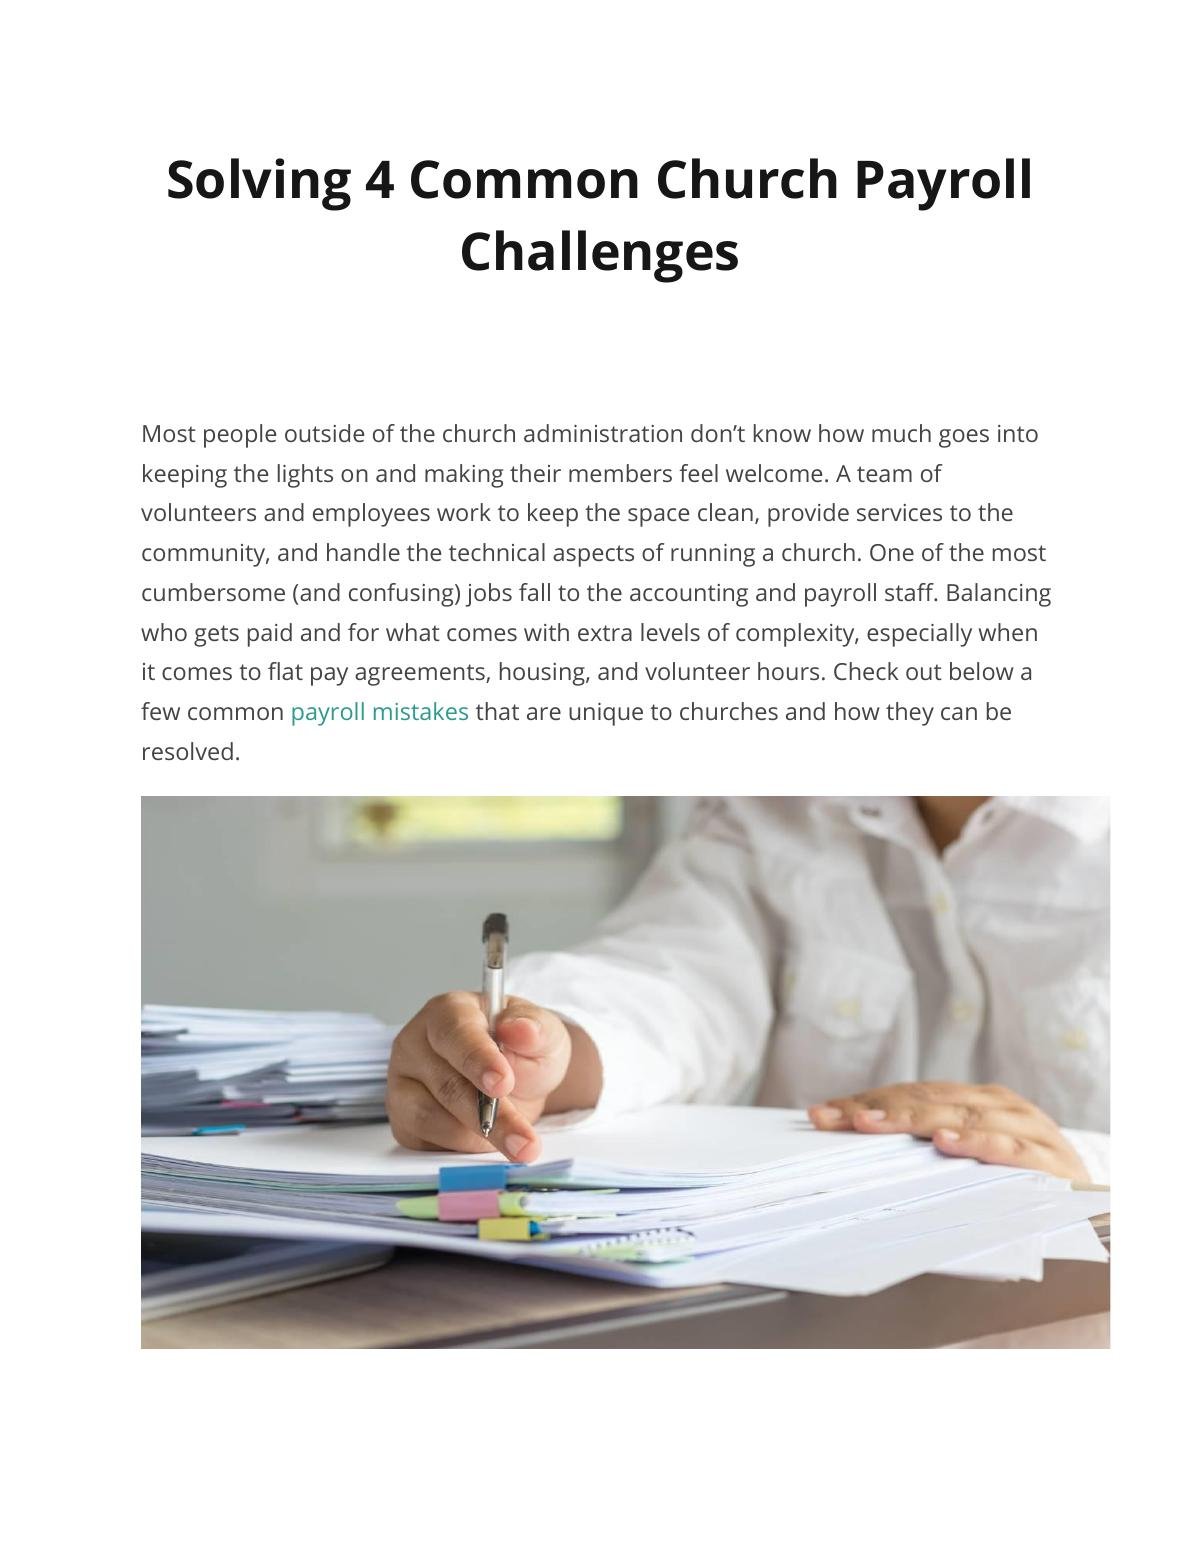 Solving 4 Common Church Payroll Challenges 